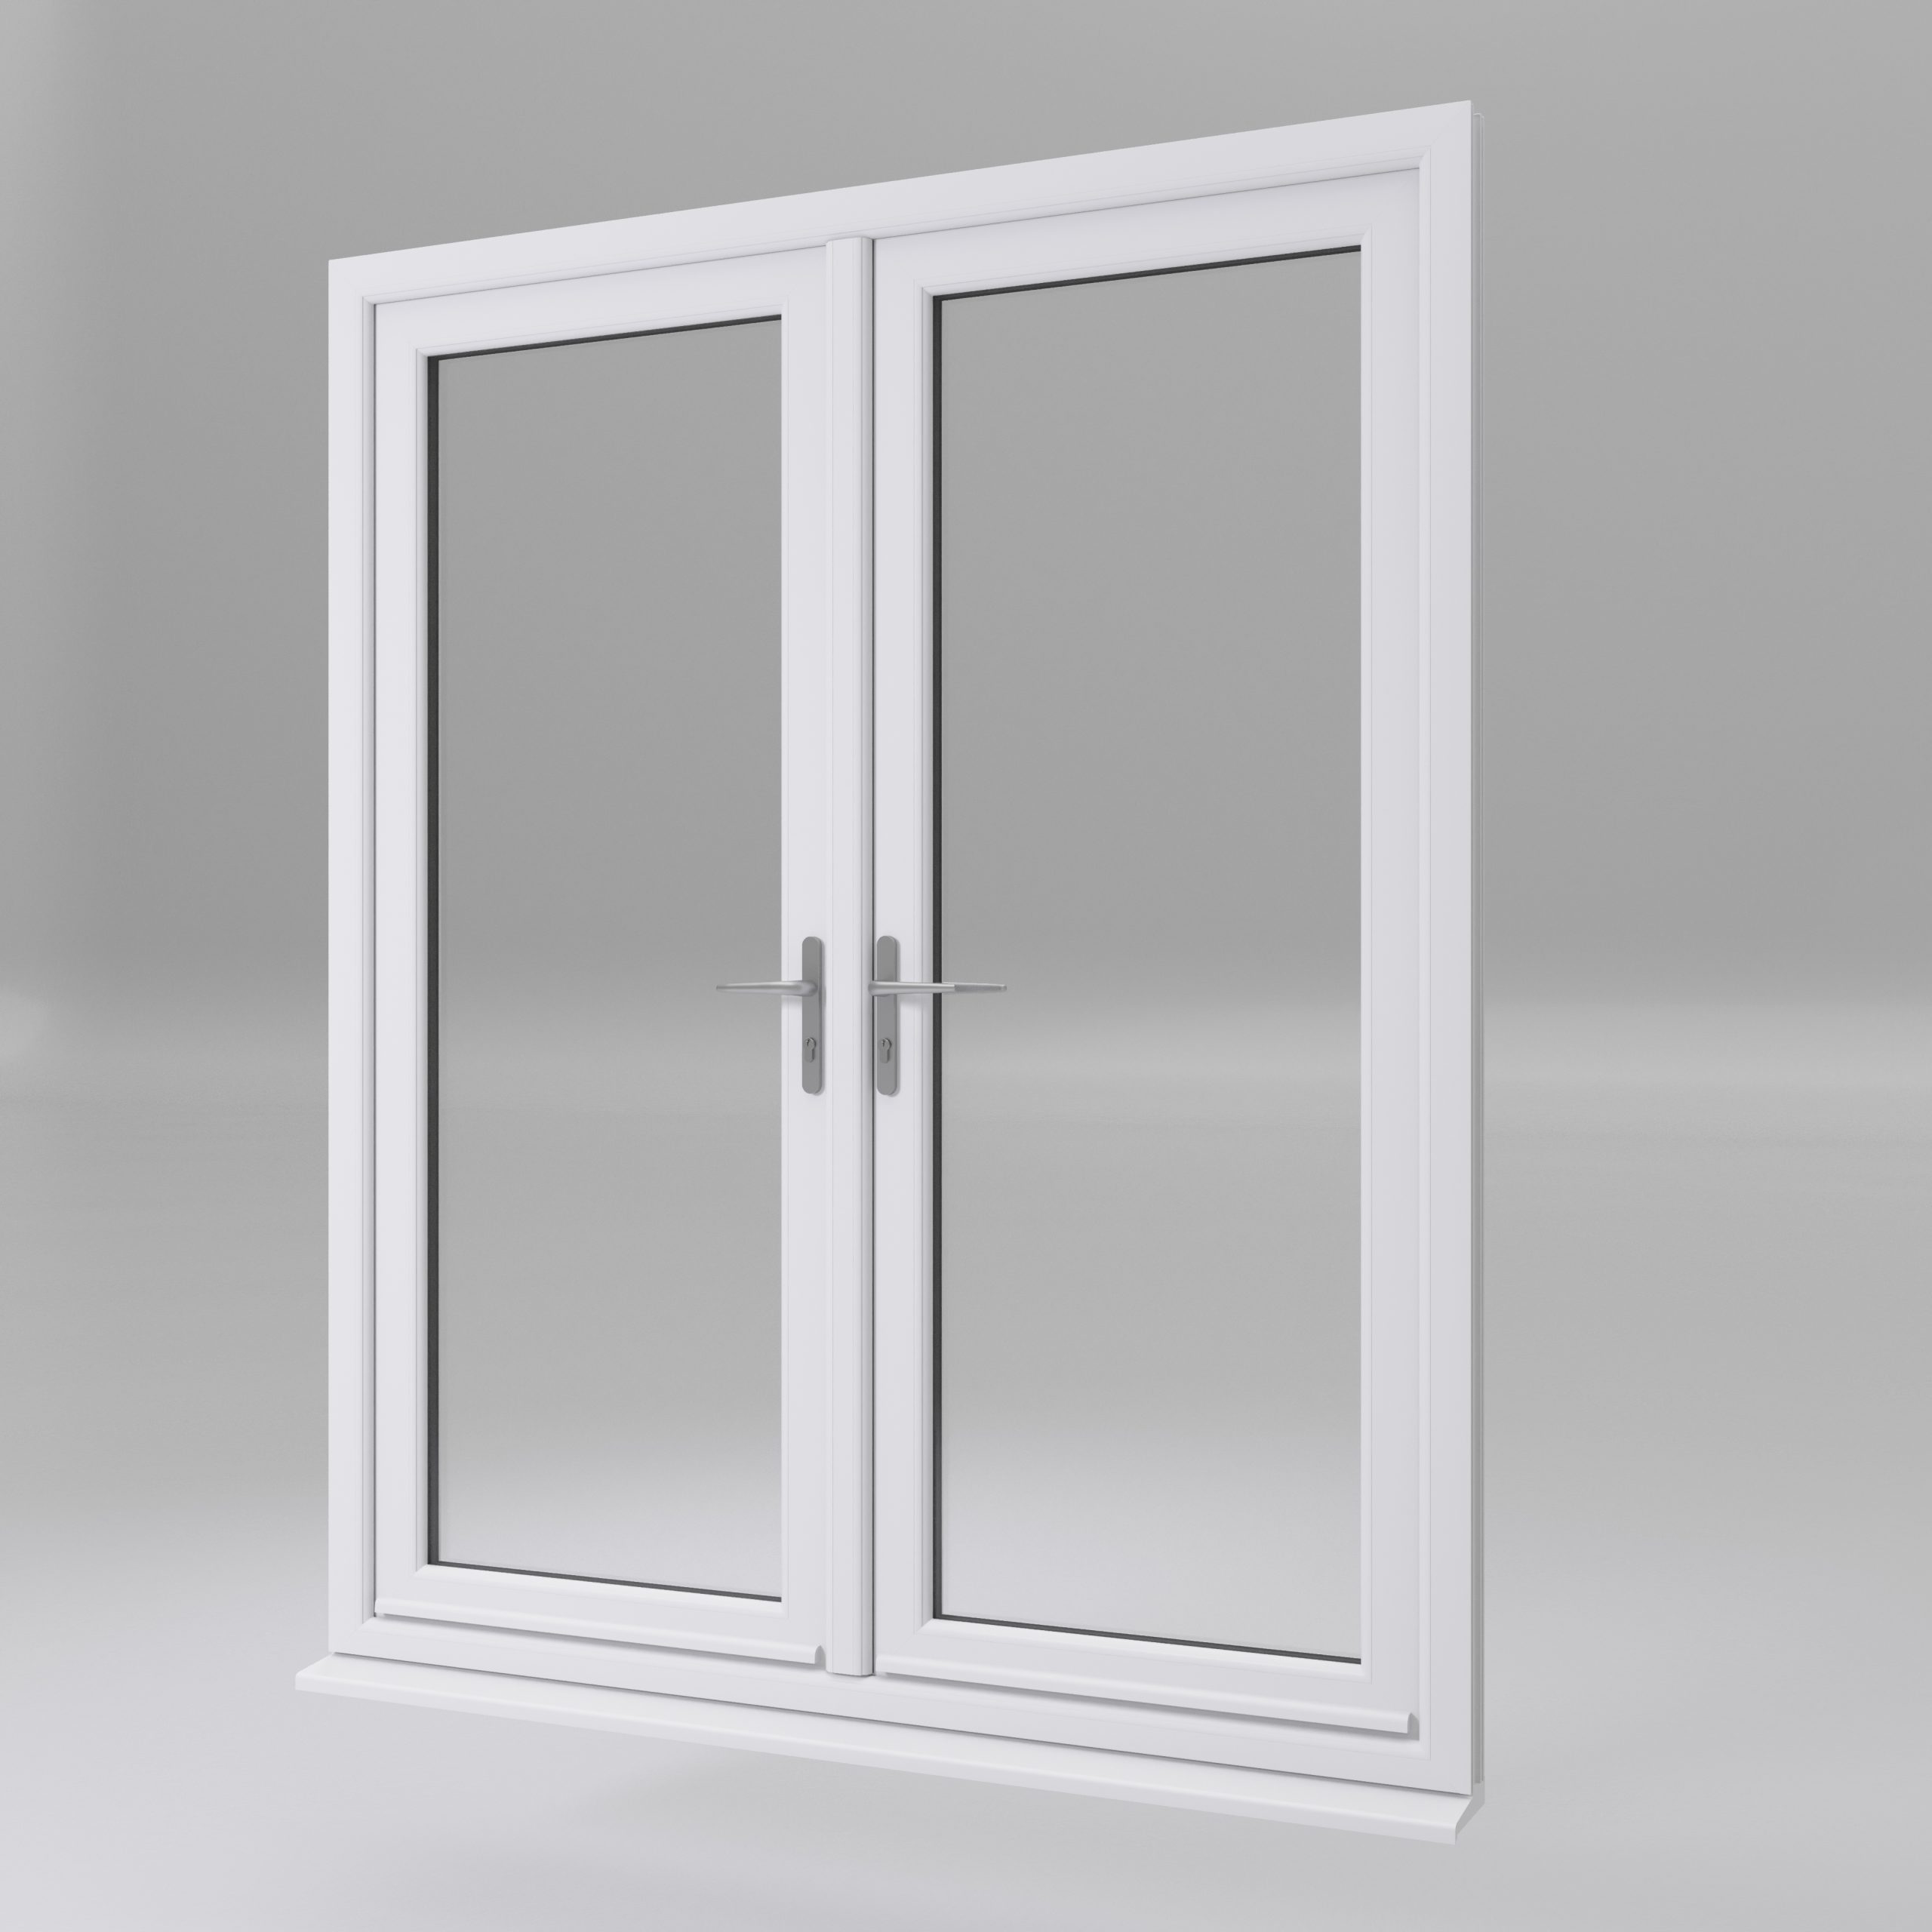 uPVC French Doors Chesterfield